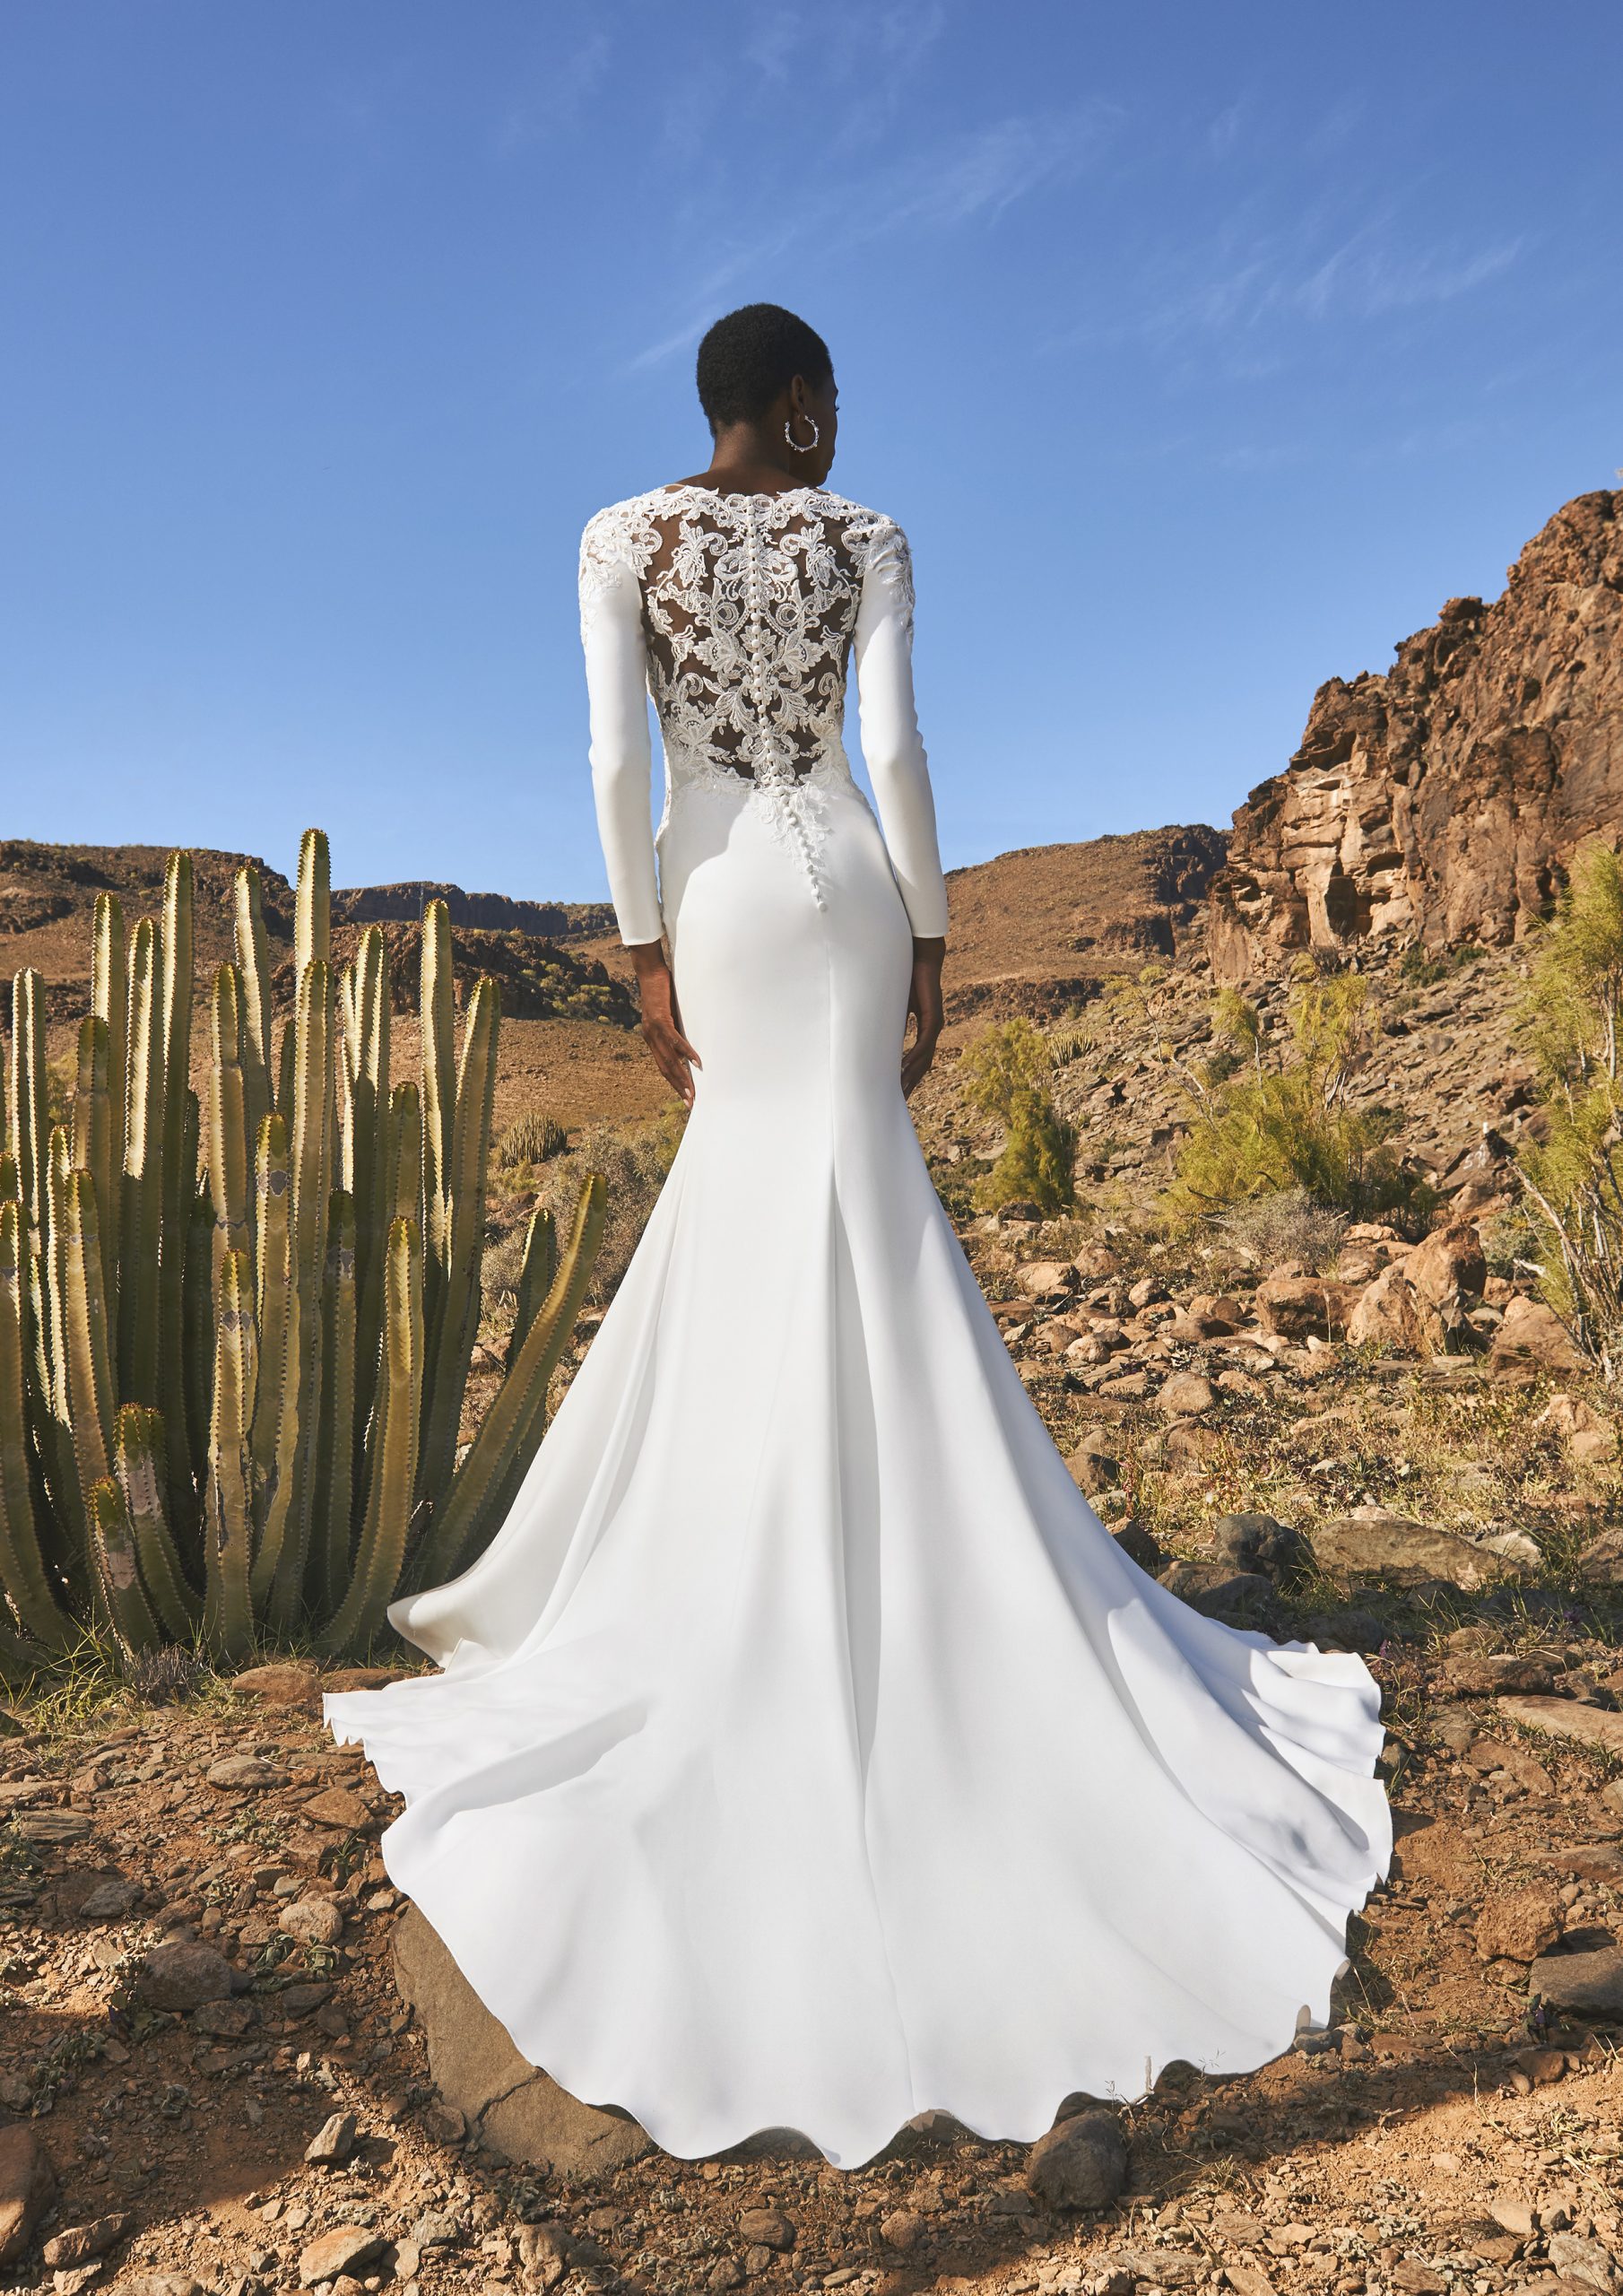 Model wears long sleeved wedding dress from Pronovias. V-neck front and high embellished enclosed back, this fitted and plain skirt and plain front wedding dress is WOW